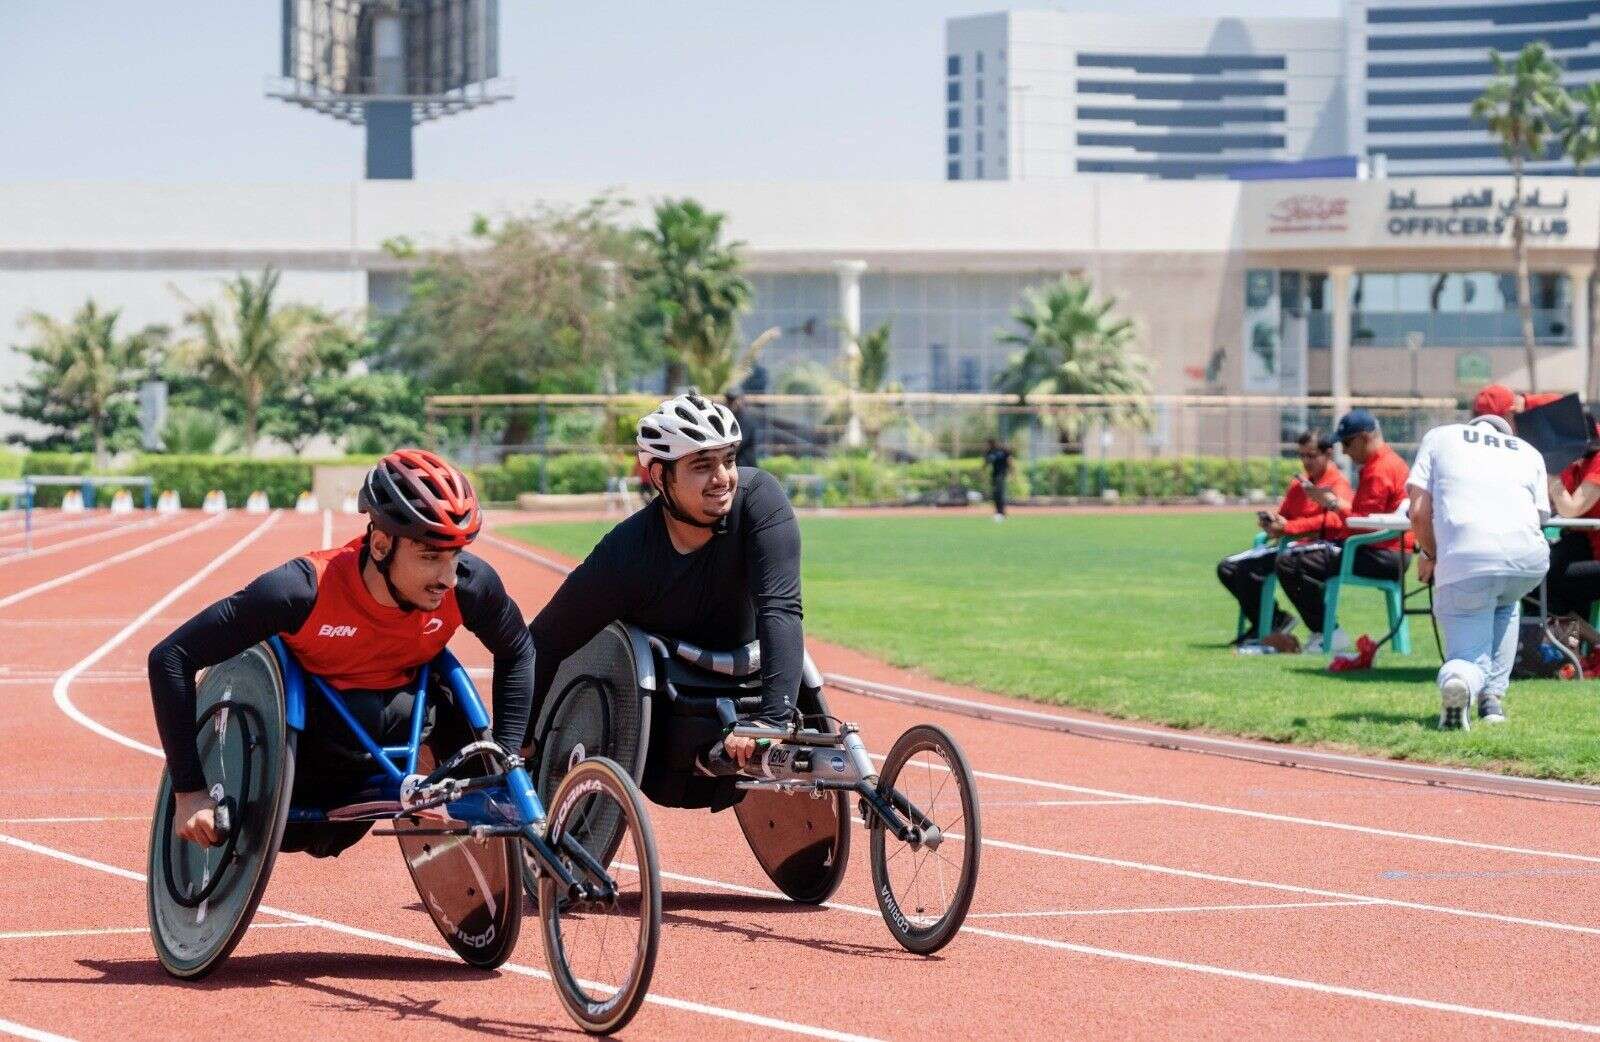 uae athletes continue to dominate gulf youth games, secure 48 more medals